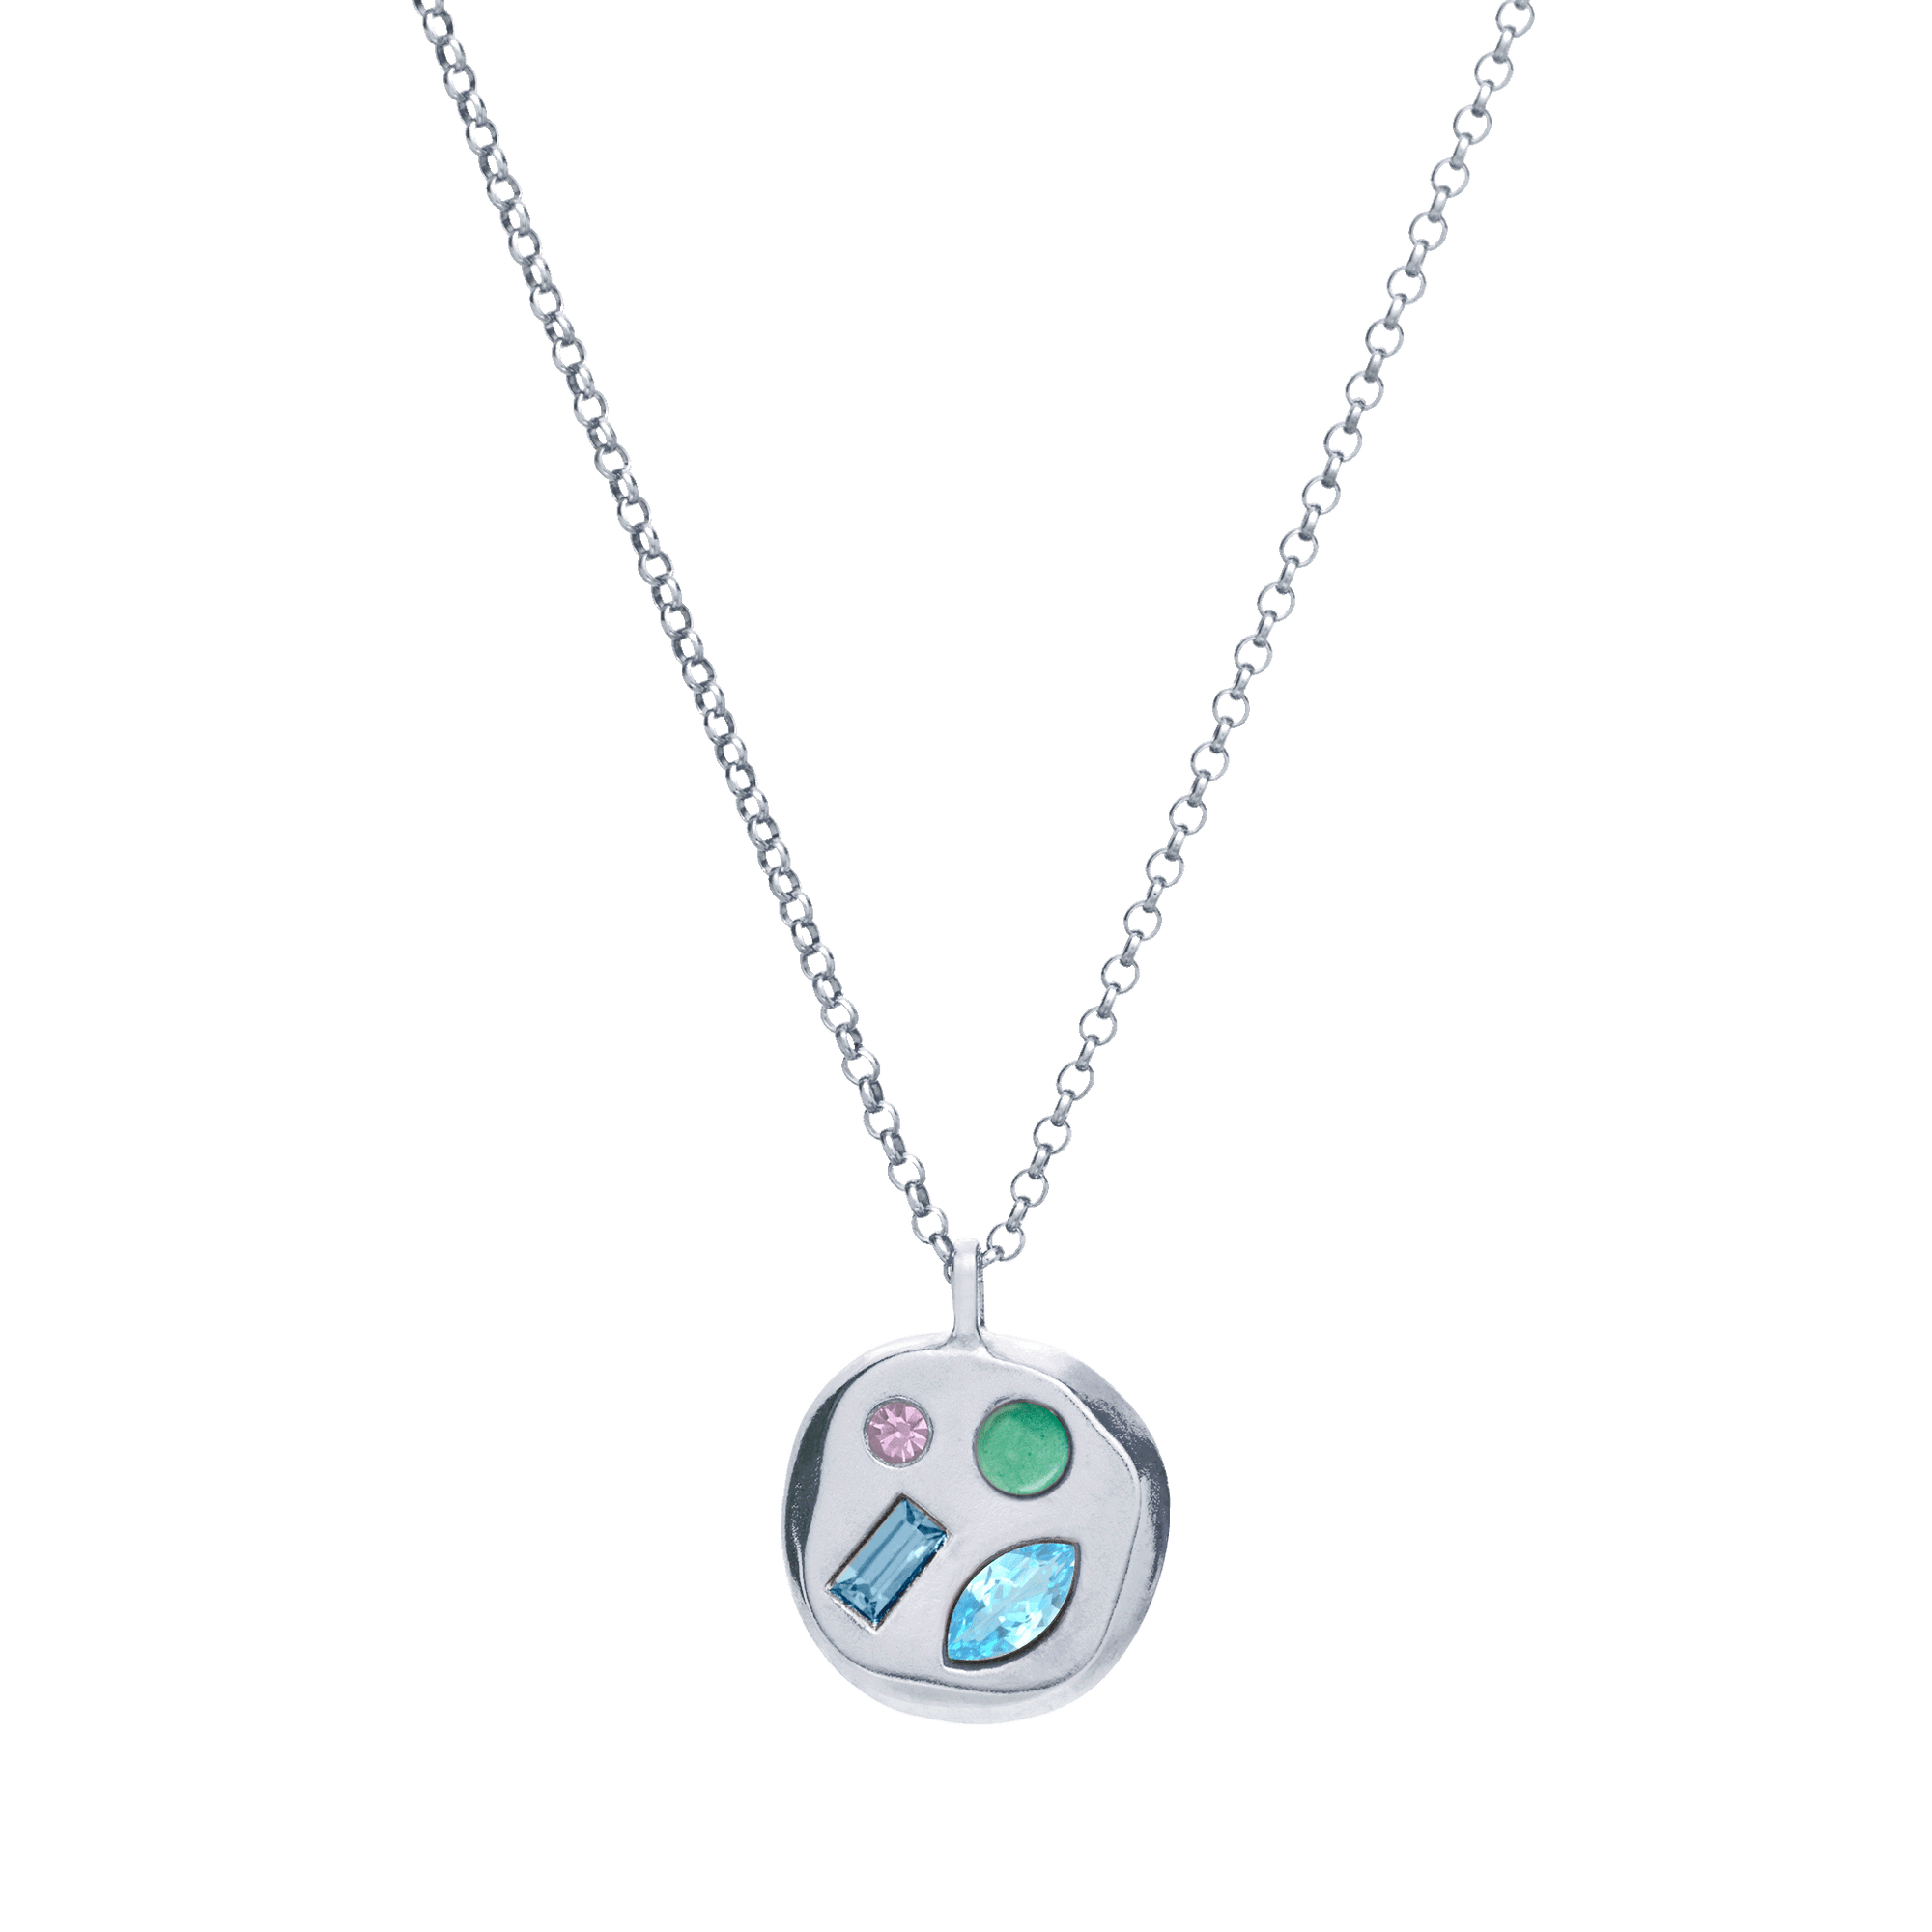 The December Seventh Pendant in Sterling Silver